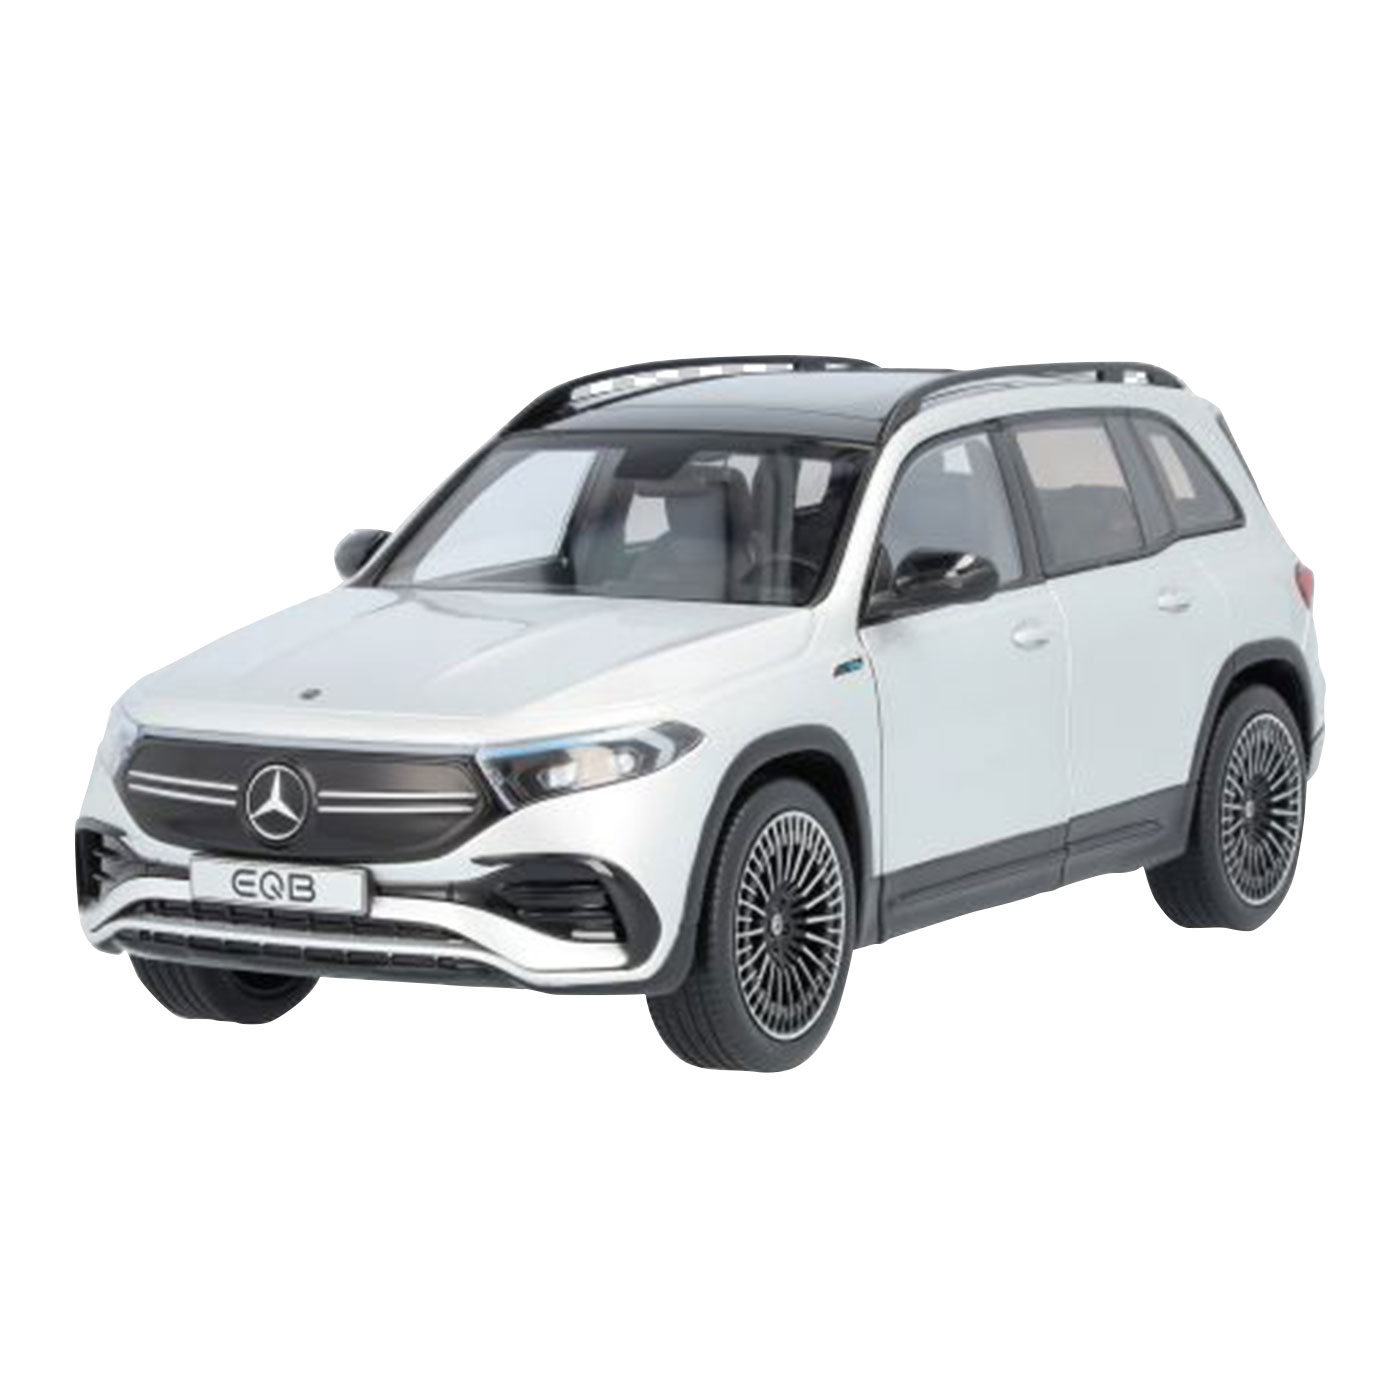 Brand new electric SUV for women: Mercedes-Benz EQC - Women's